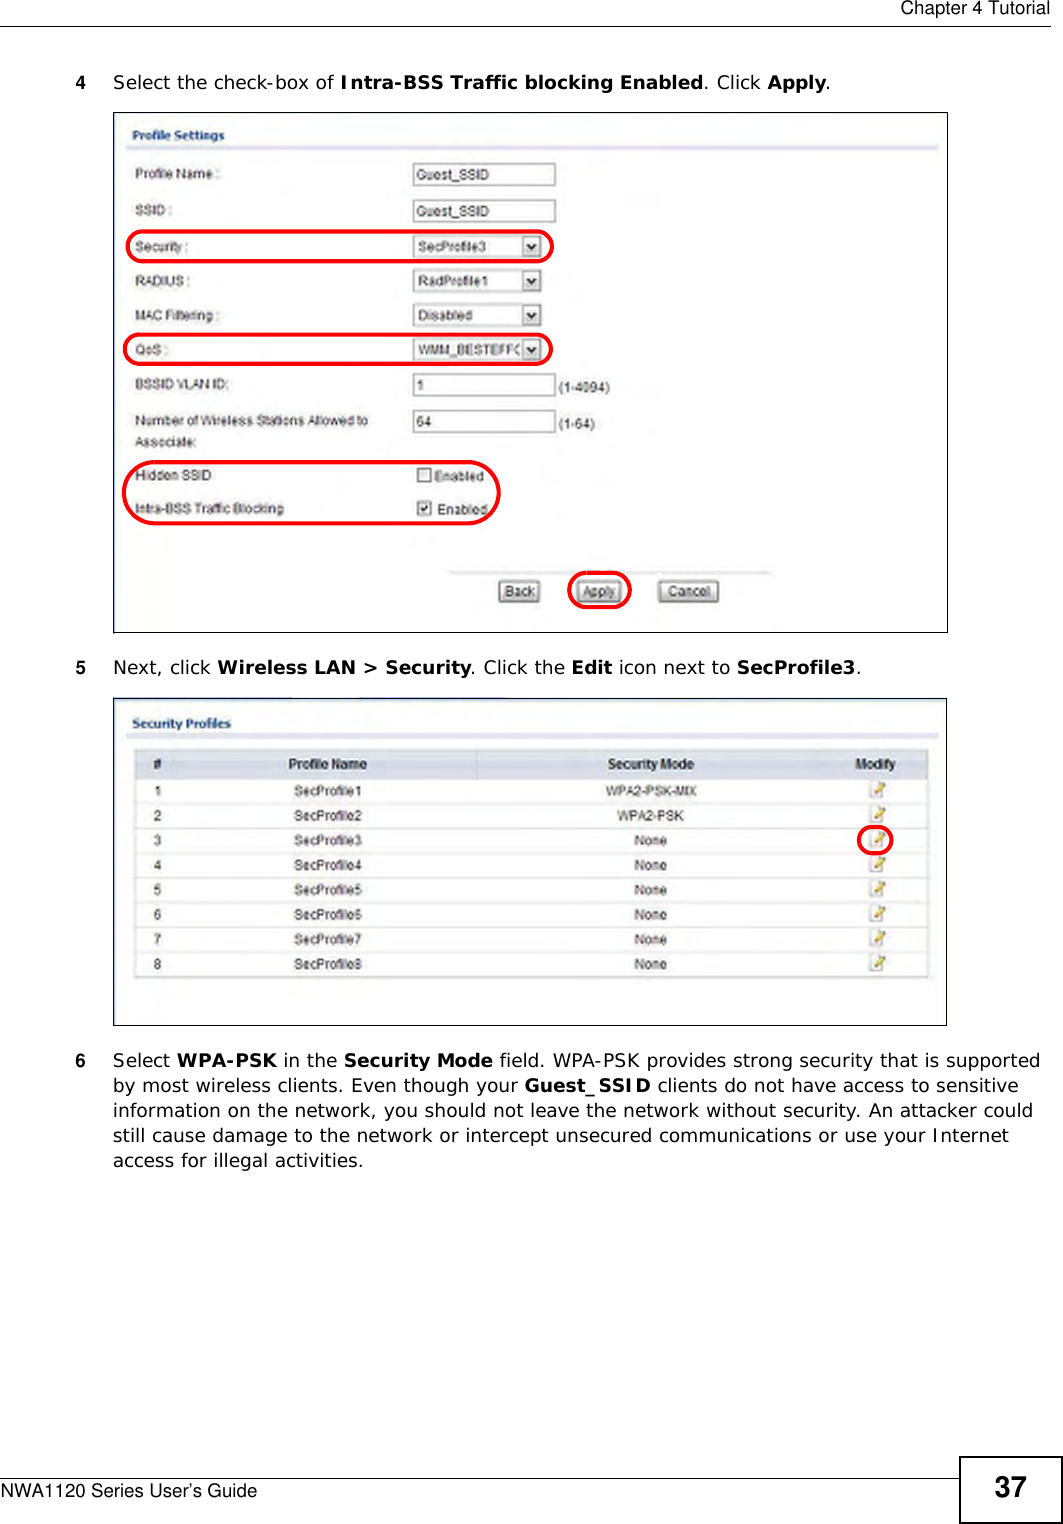  Chapter 4 TutorialNWA1120 Series User’s Guide 374Select the check-box of Intra-BSS Traffic blocking Enabled. Click Apply.5Next, click Wireless LAN &gt; Security. Click the Edit icon next to SecProfile3. 6Select WPA-PSK in the Security Mode field. WPA-PSK provides strong security that is supported by most wireless clients. Even though your Guest_SSID clients do not have access to sensitive information on the network, you should not leave the network without security. An attacker could still cause damage to the network or intercept unsecured communications or use your Internet access for illegal activities.